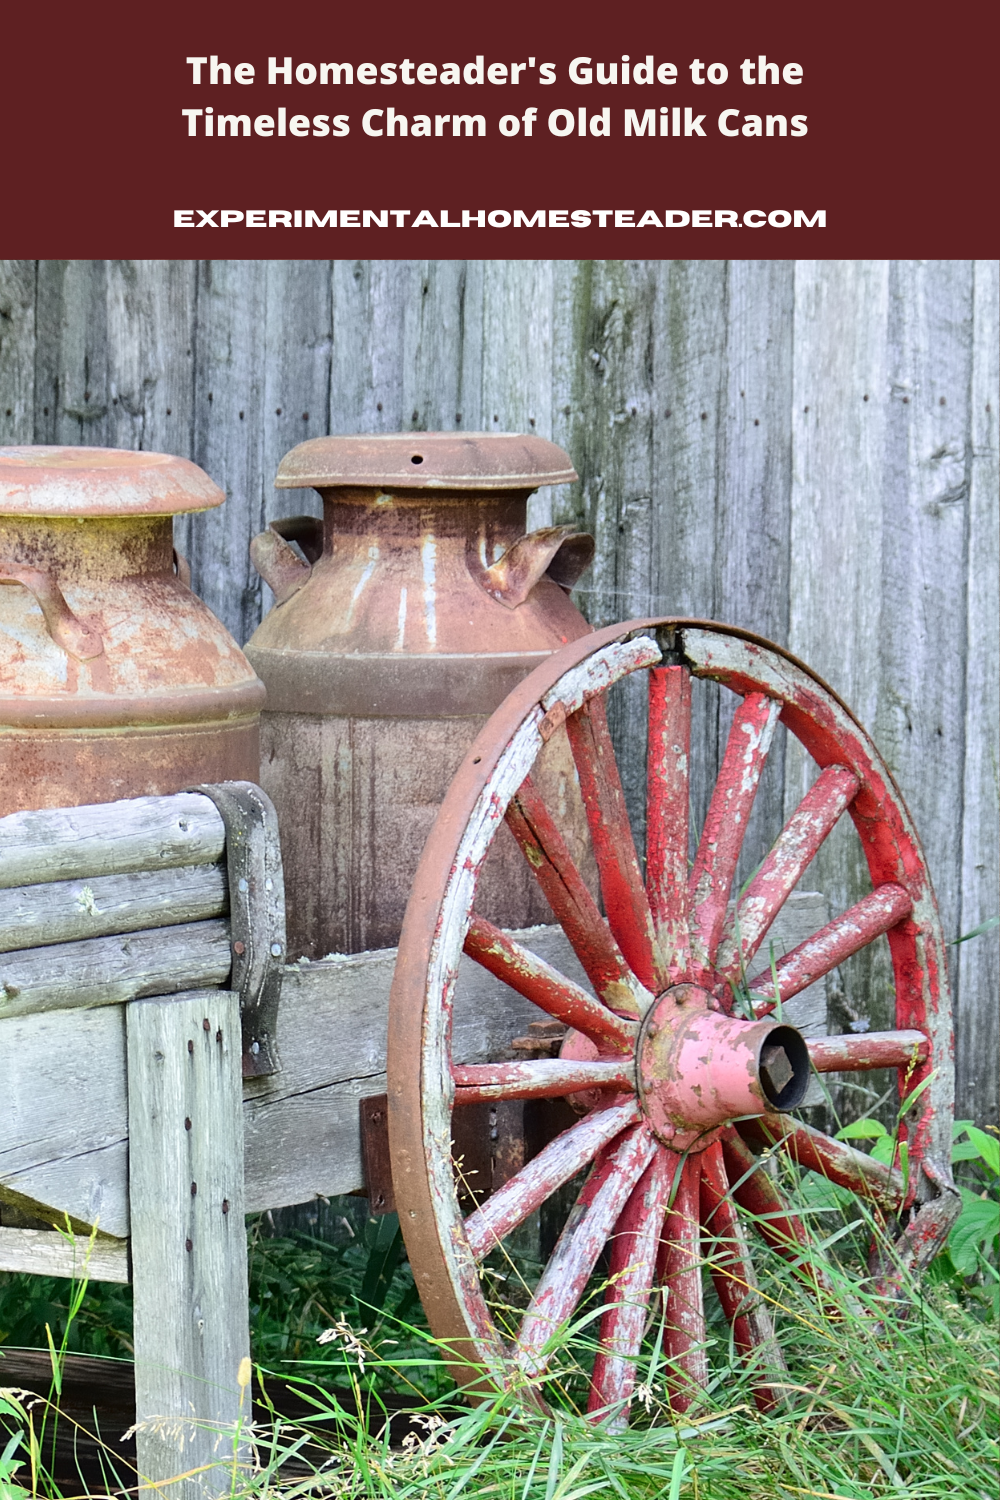 Old milk cans in an antique wagon.